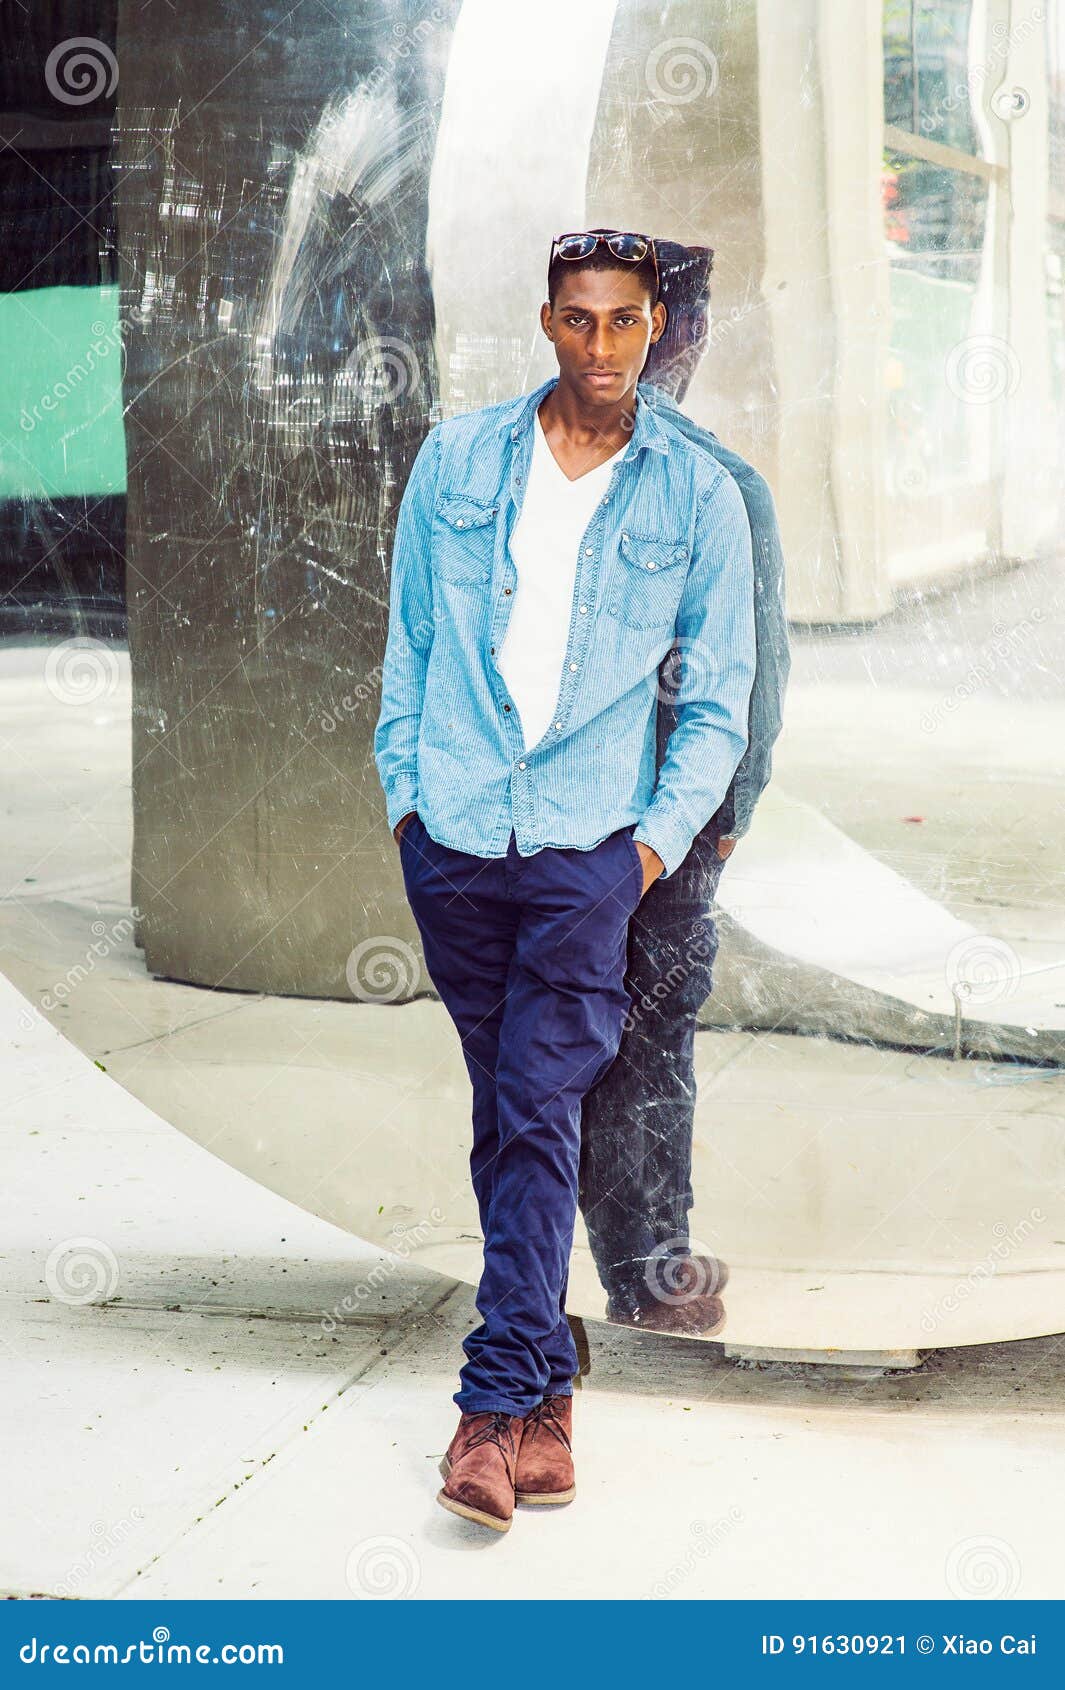 https://thumbs.dreamstime.com/z/young-african-american-man-casual-fashion-new-york-wearing-light-blue-long-sleeve-shirt-blue-pants-brown-boot-shoes-91630921.jpg